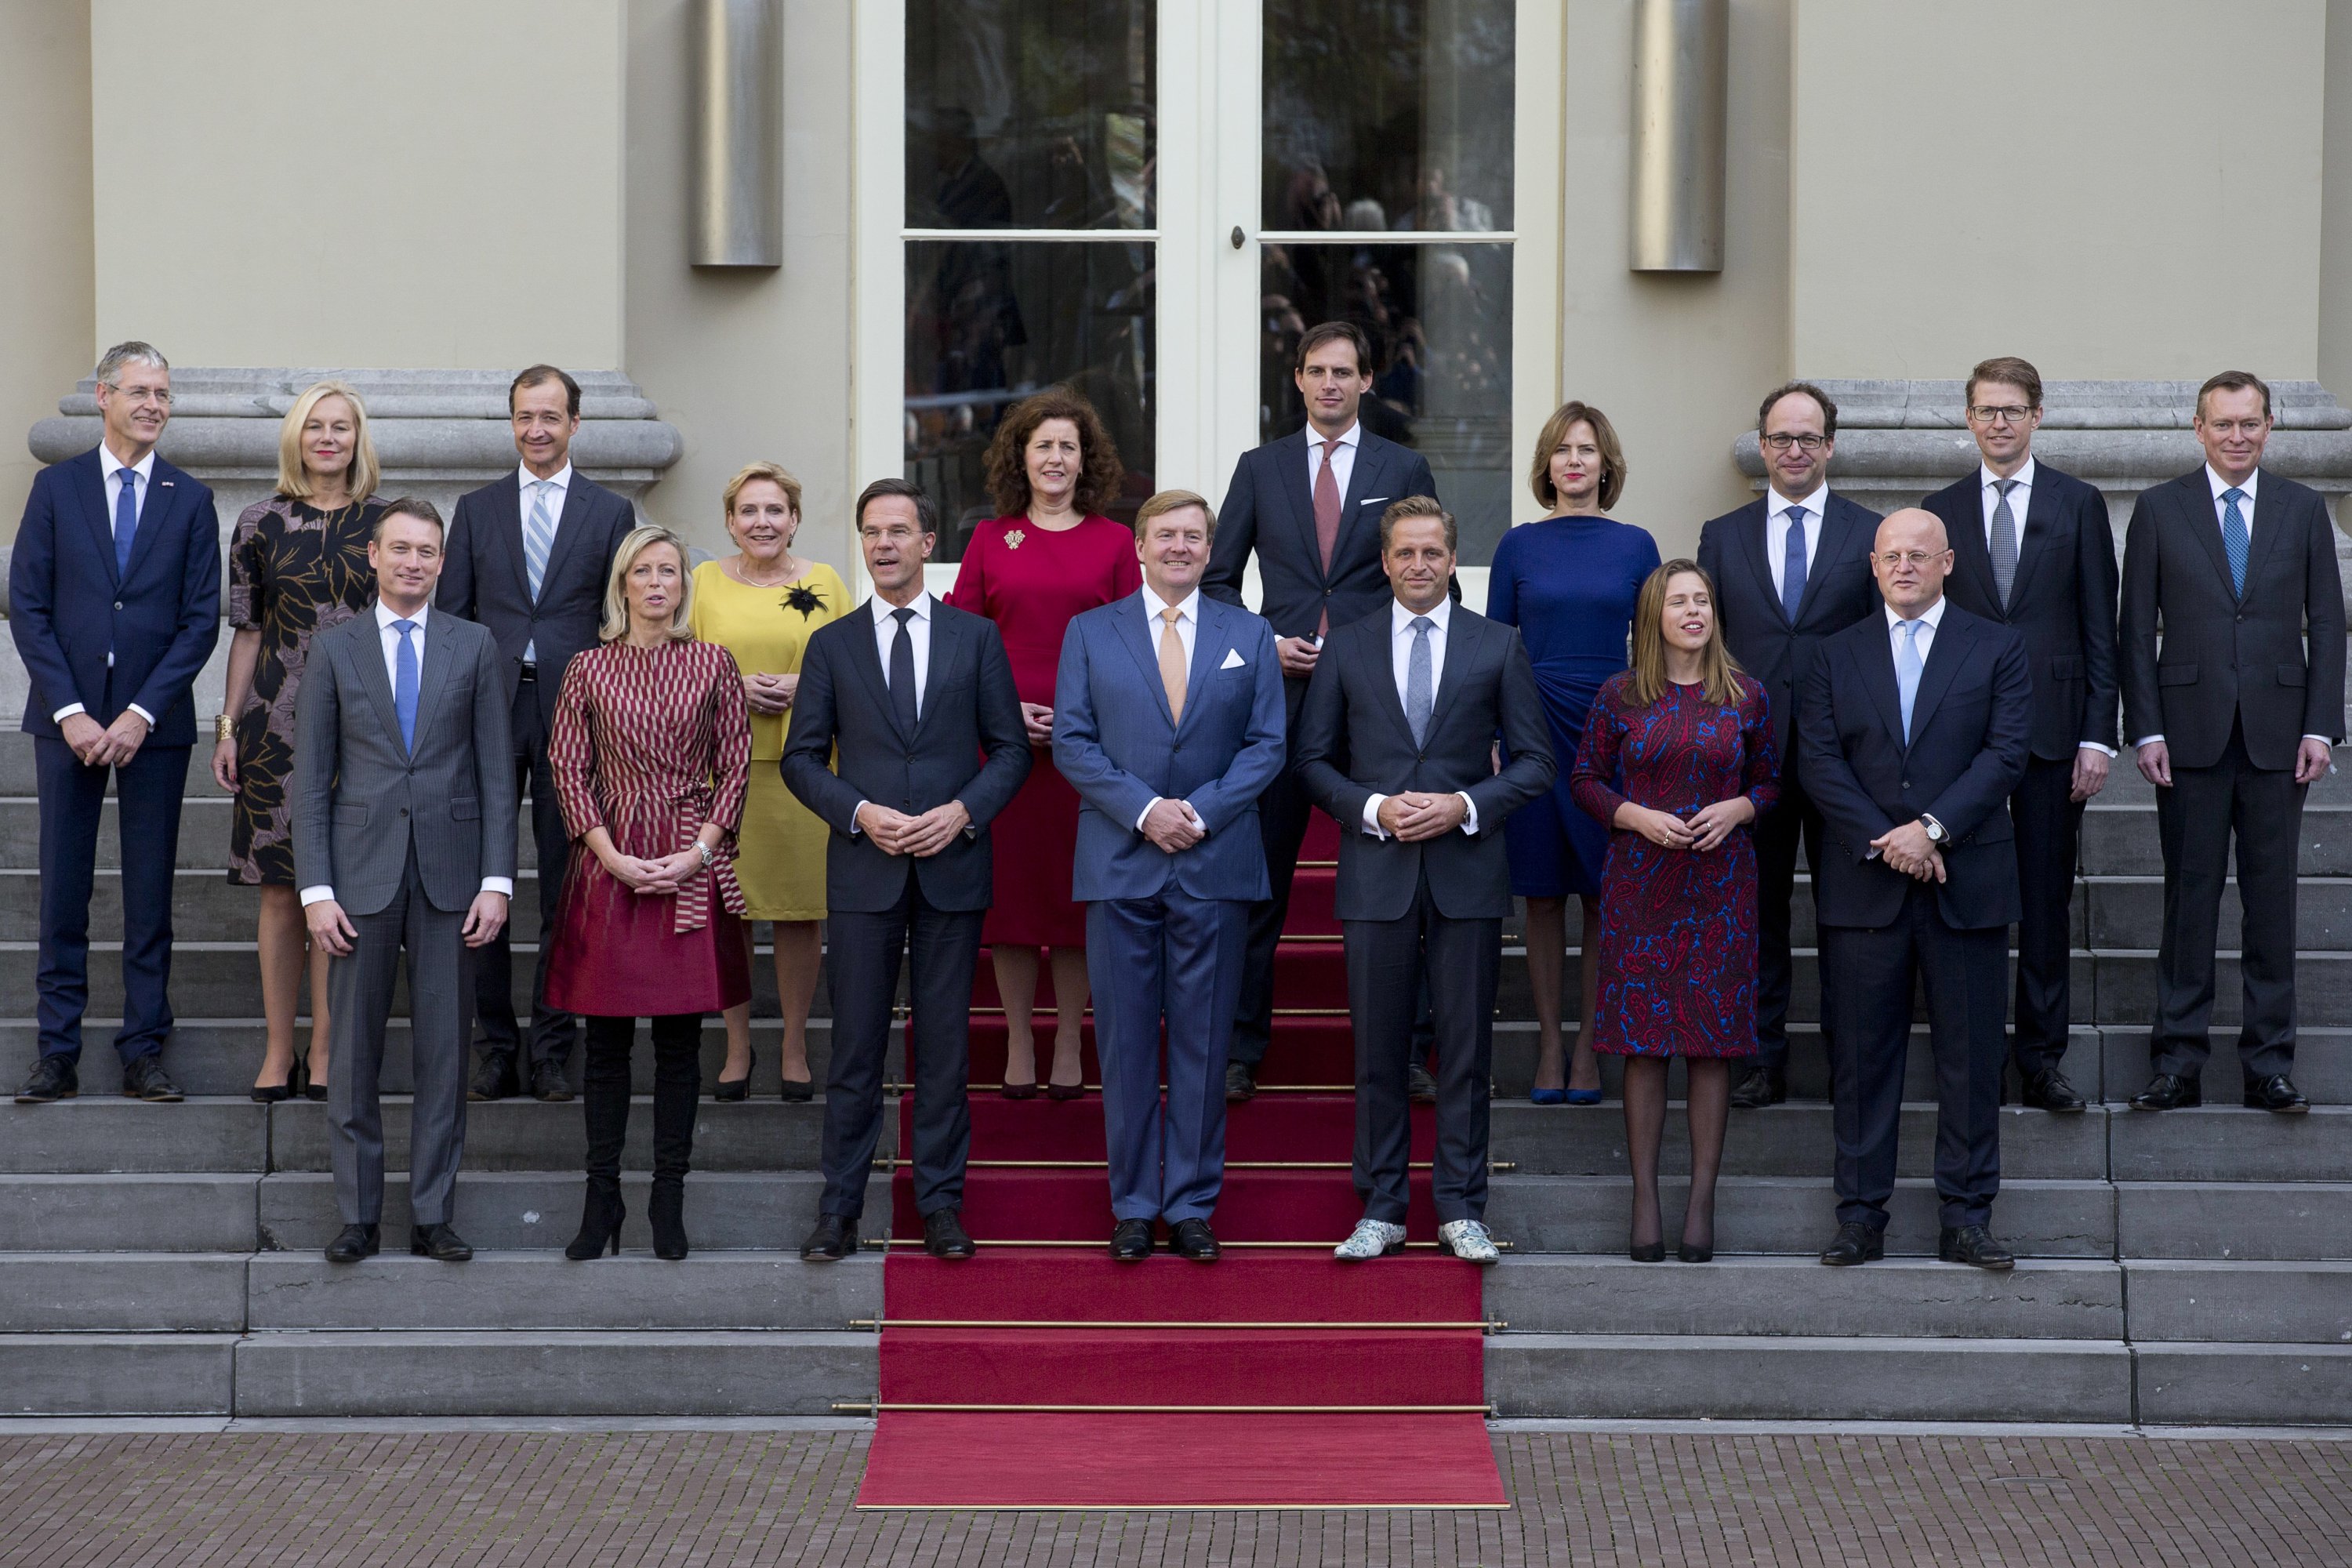 Prime Minister Mark Rute (center L) and Dutch King Willem-Alexander (center) pose with ministers for an official photo of the new Dutch government on the steps of the Royal Palace Noordeinde in The Hague, Netherlands, Oct. 26, 2017. (AP)